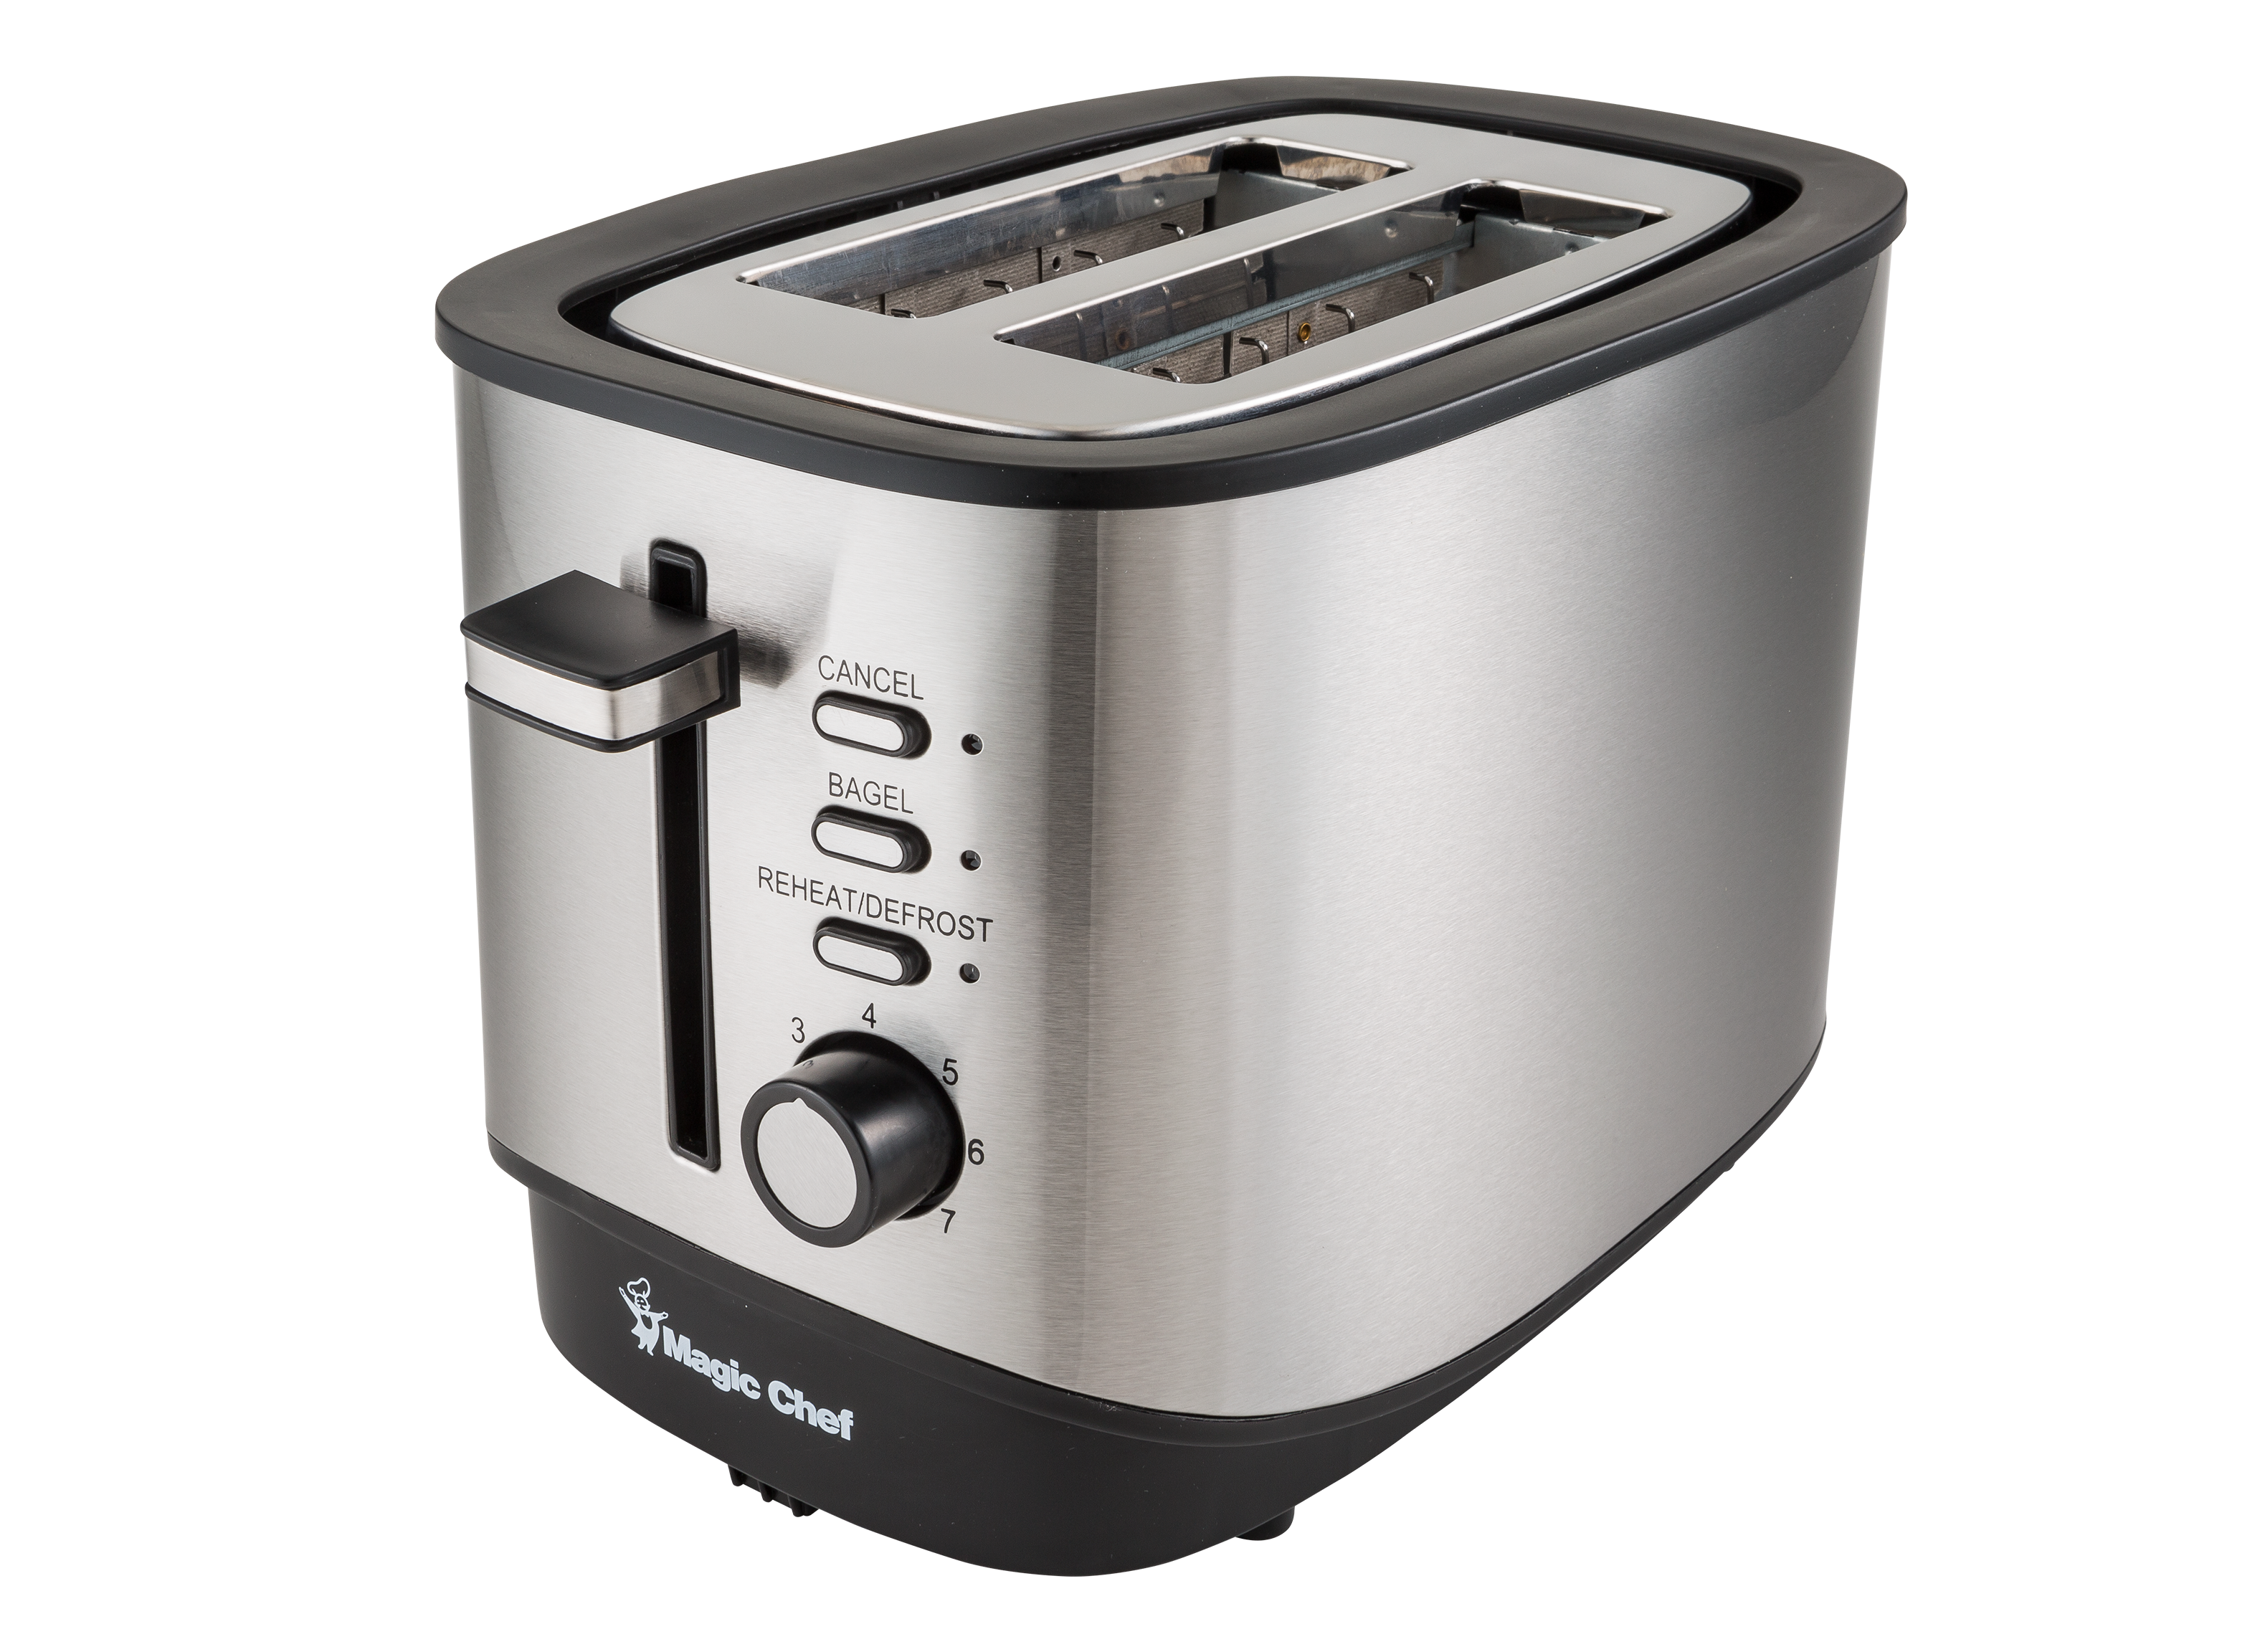 https://crdms.images.consumerreports.org/prod/products/cr/models/397404-2-slice-toasters-magic-chef-mcst2ss-10002391.png